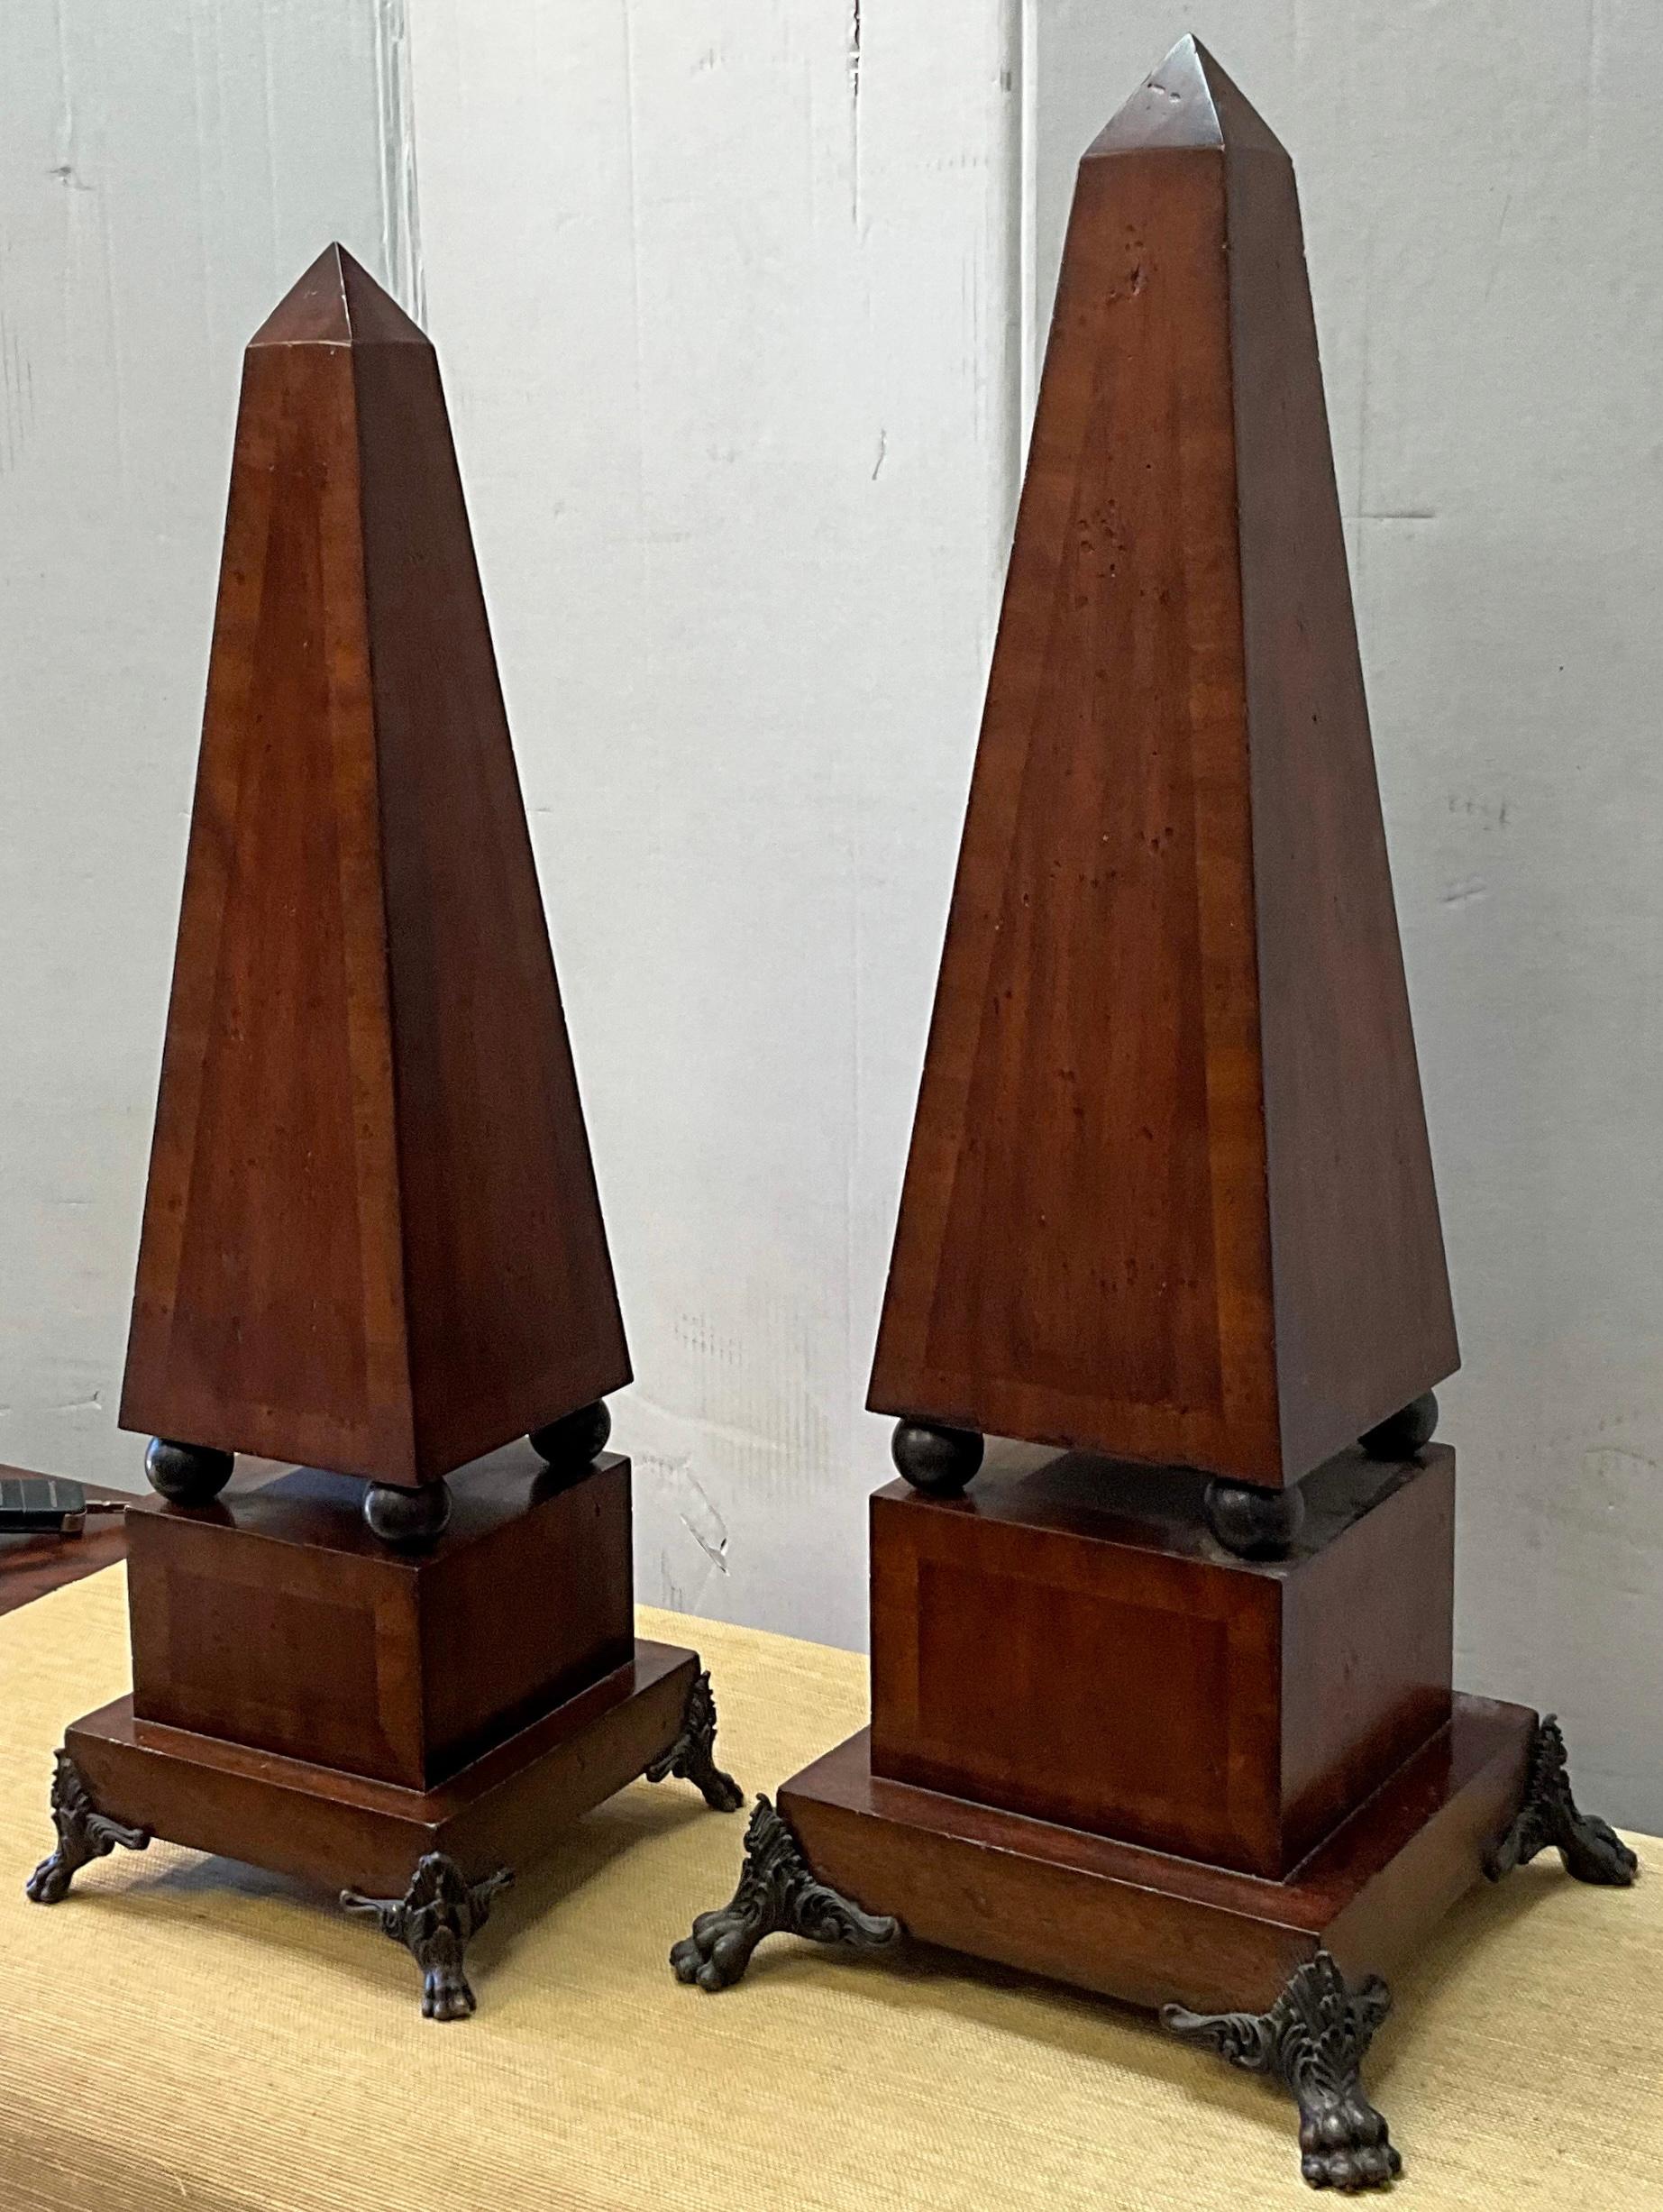 20th-C. Neo-Classical style Inlaid Mahogany And Bronze Obelisks - S/2 In Good Condition For Sale In Kennesaw, GA